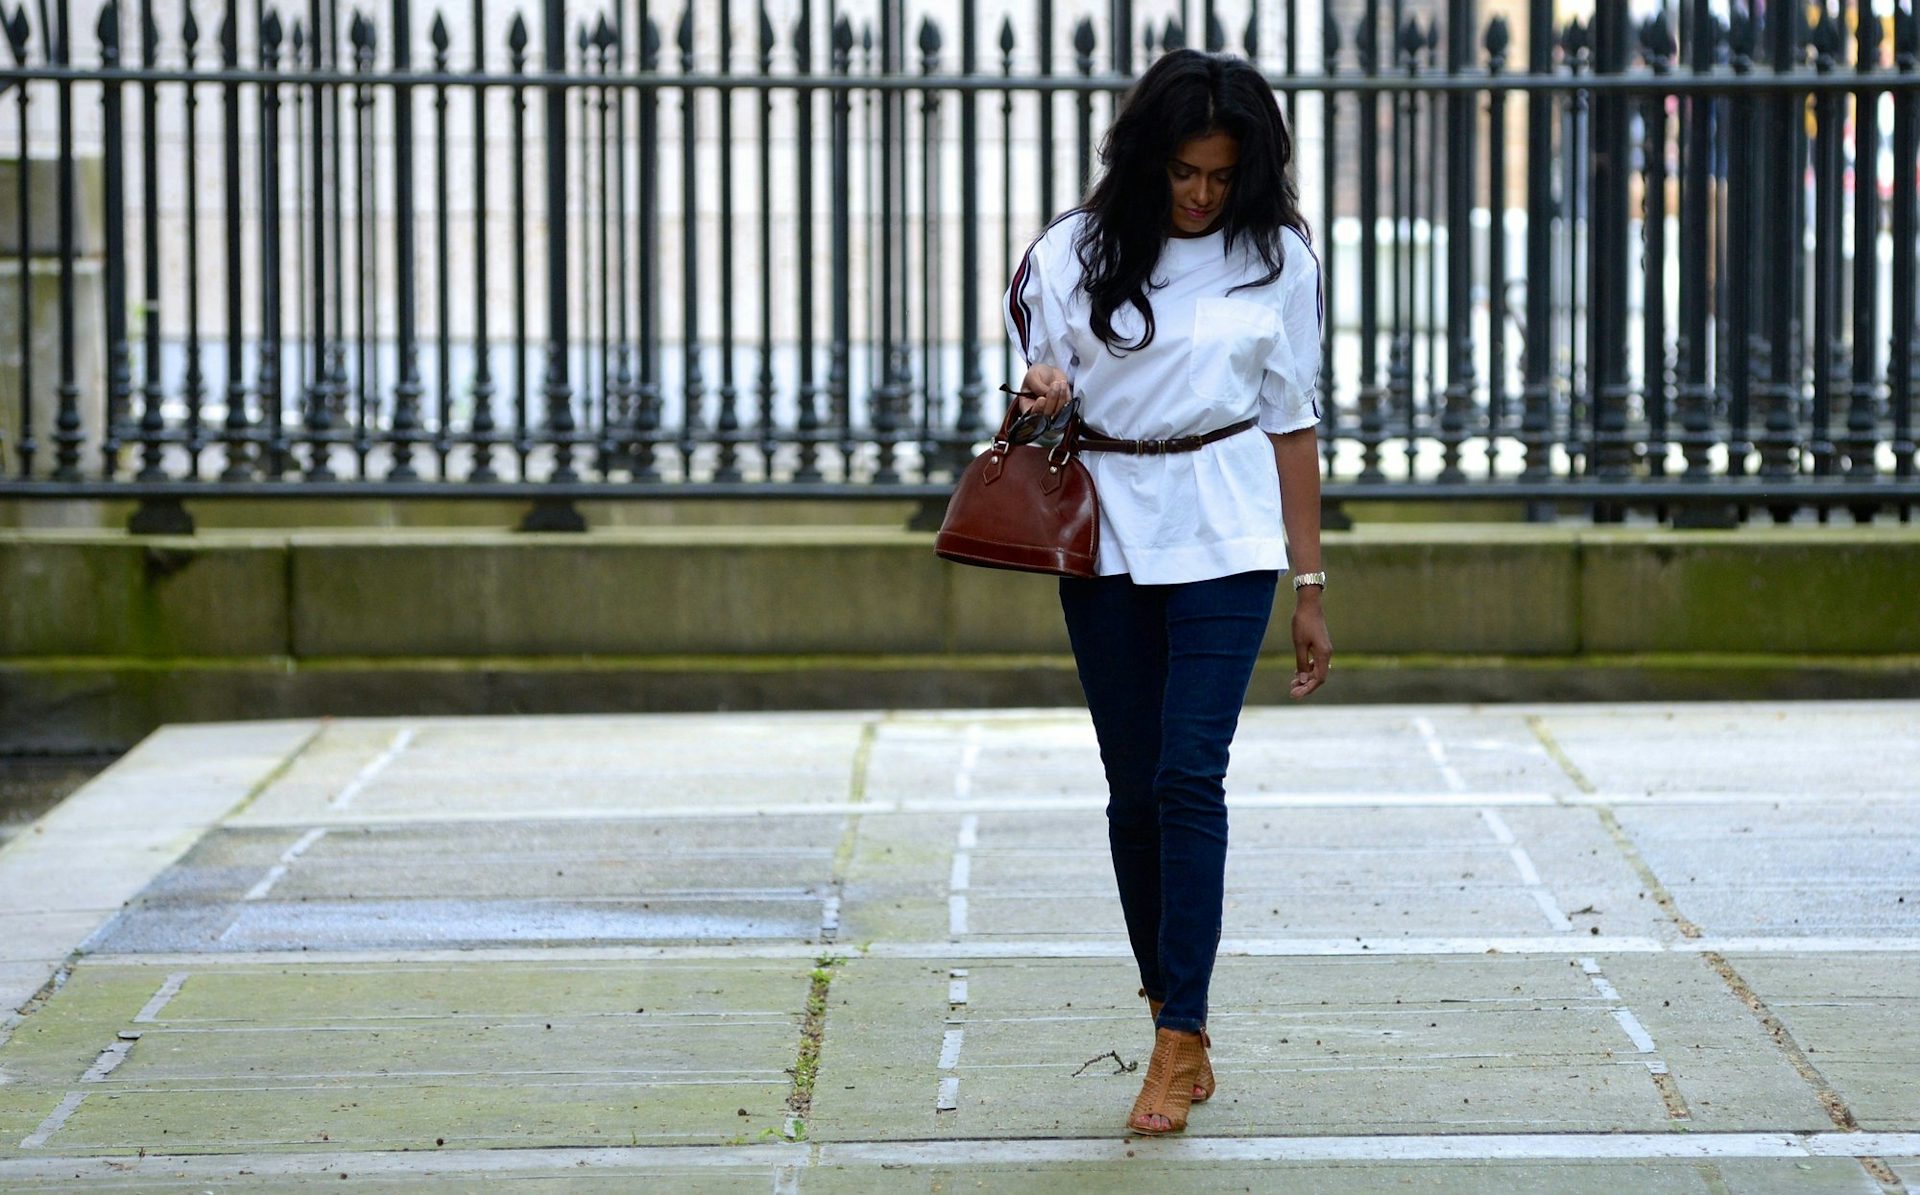 Sachini wearing jeans and a white top